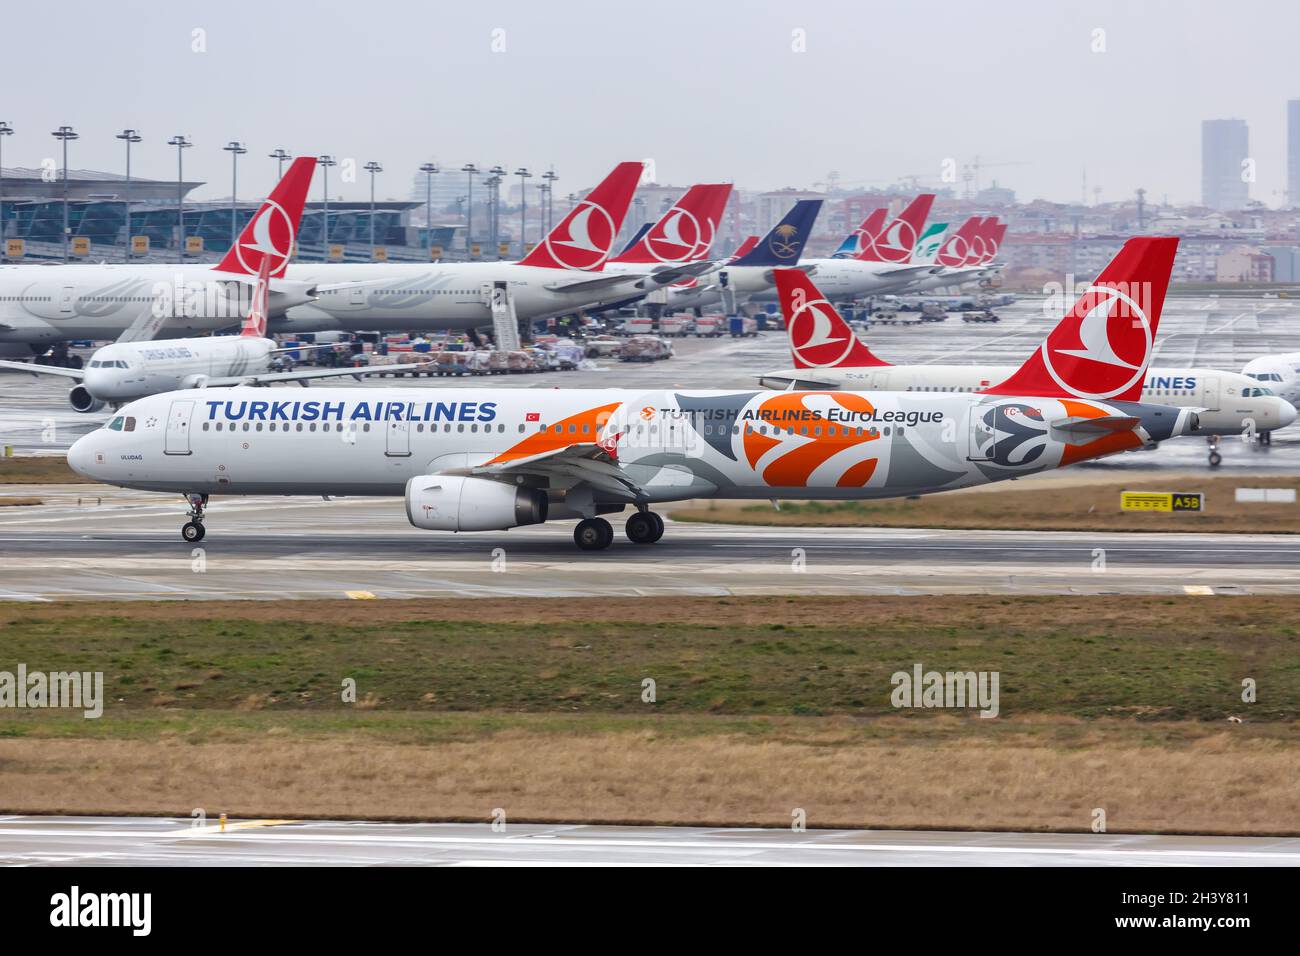 Turkish Airlines Airbus A321 Aircraft Istanbul AtatÃ¼rk Airport EuroLeague special livery Stock Photo